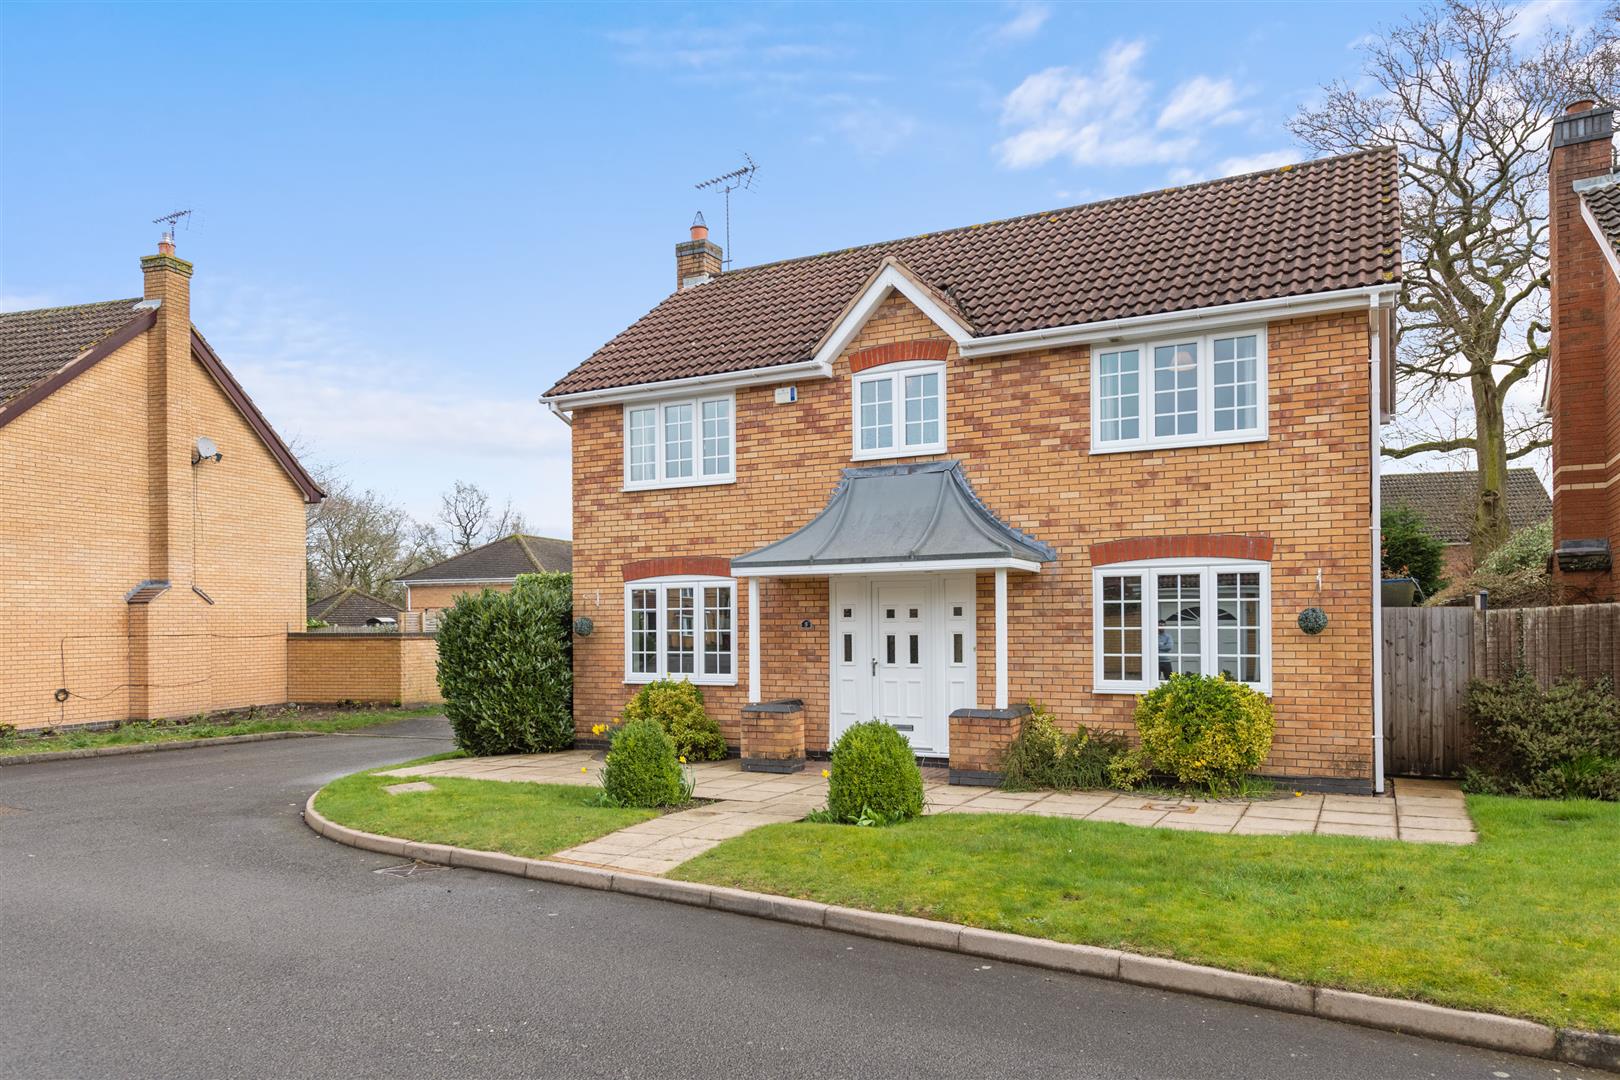 4 bed detached house for sale in Boningale Way, Solihull  - Property Image 1